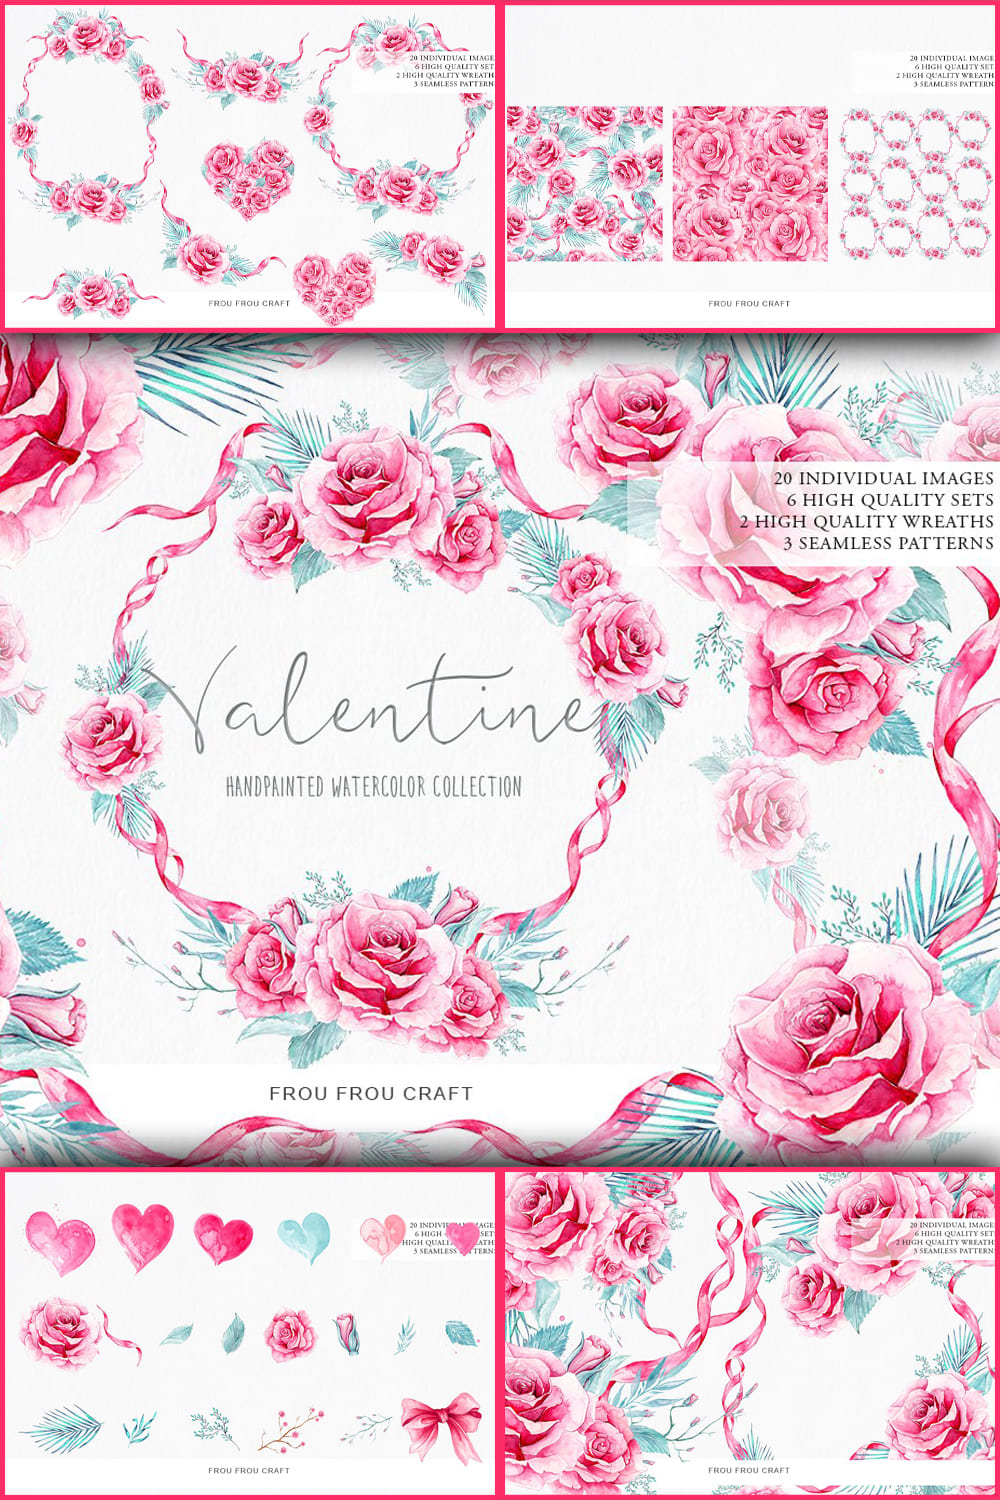 20 individual images of Valentine handpainted watercolor collection.